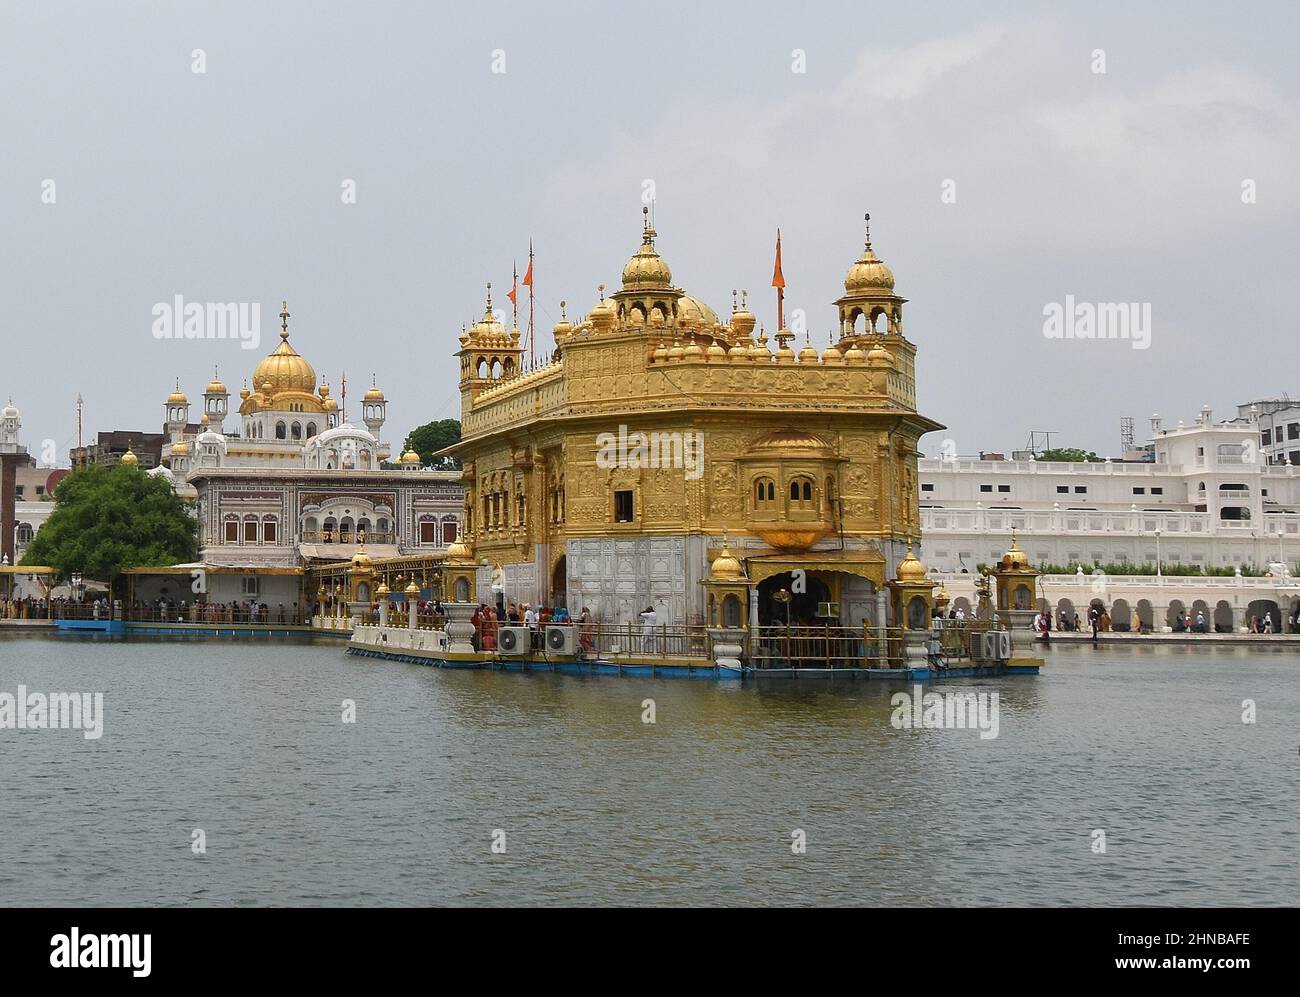 Golden Temple in Amritsar - Punjab - India Poster by Luciano Mortula -  Pixels